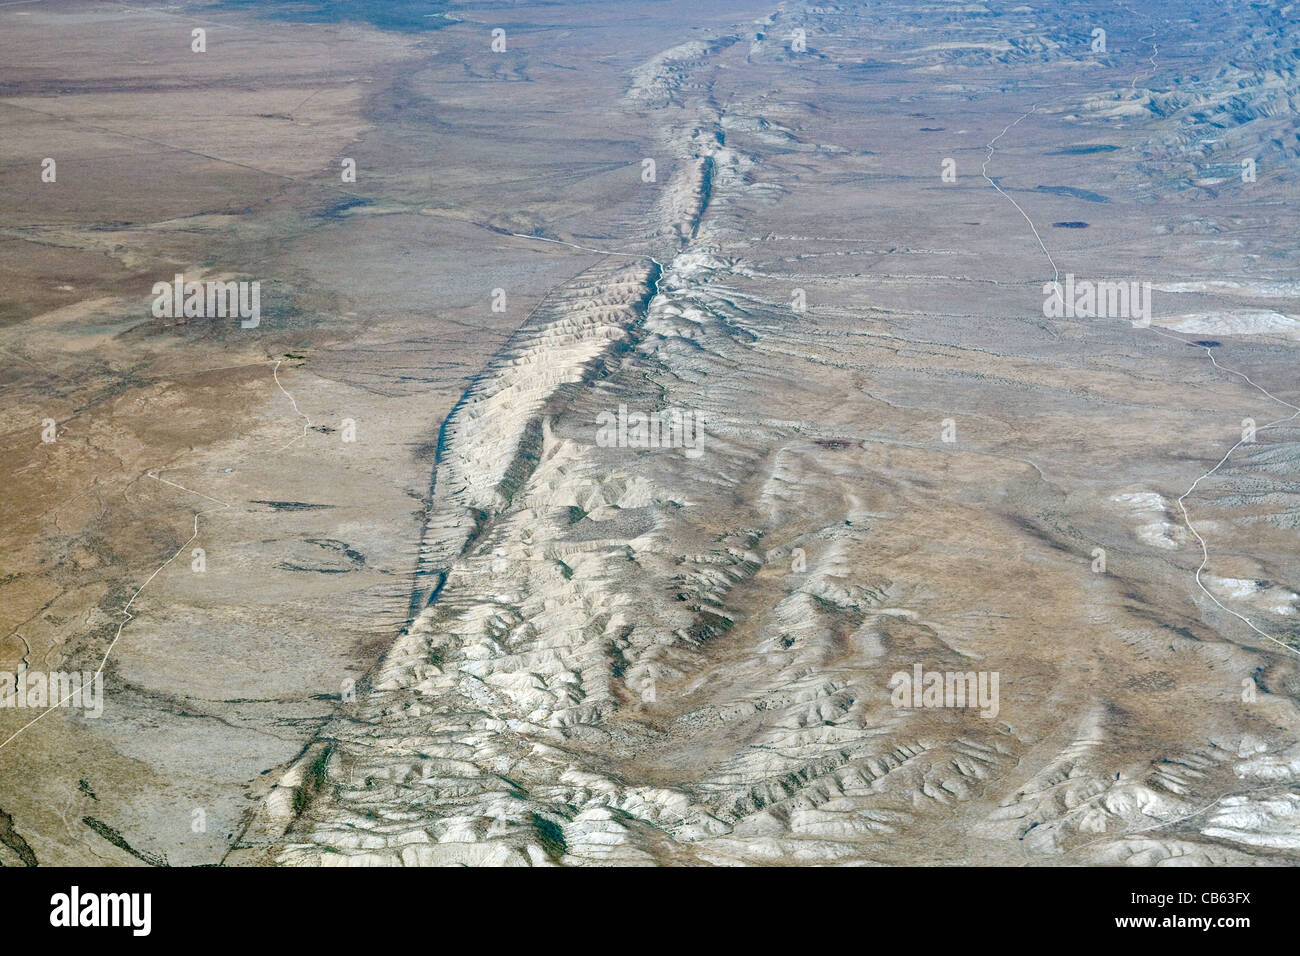 Aerial view of the San Andreas Fault in the Carrizo Plain California. Stock Photo